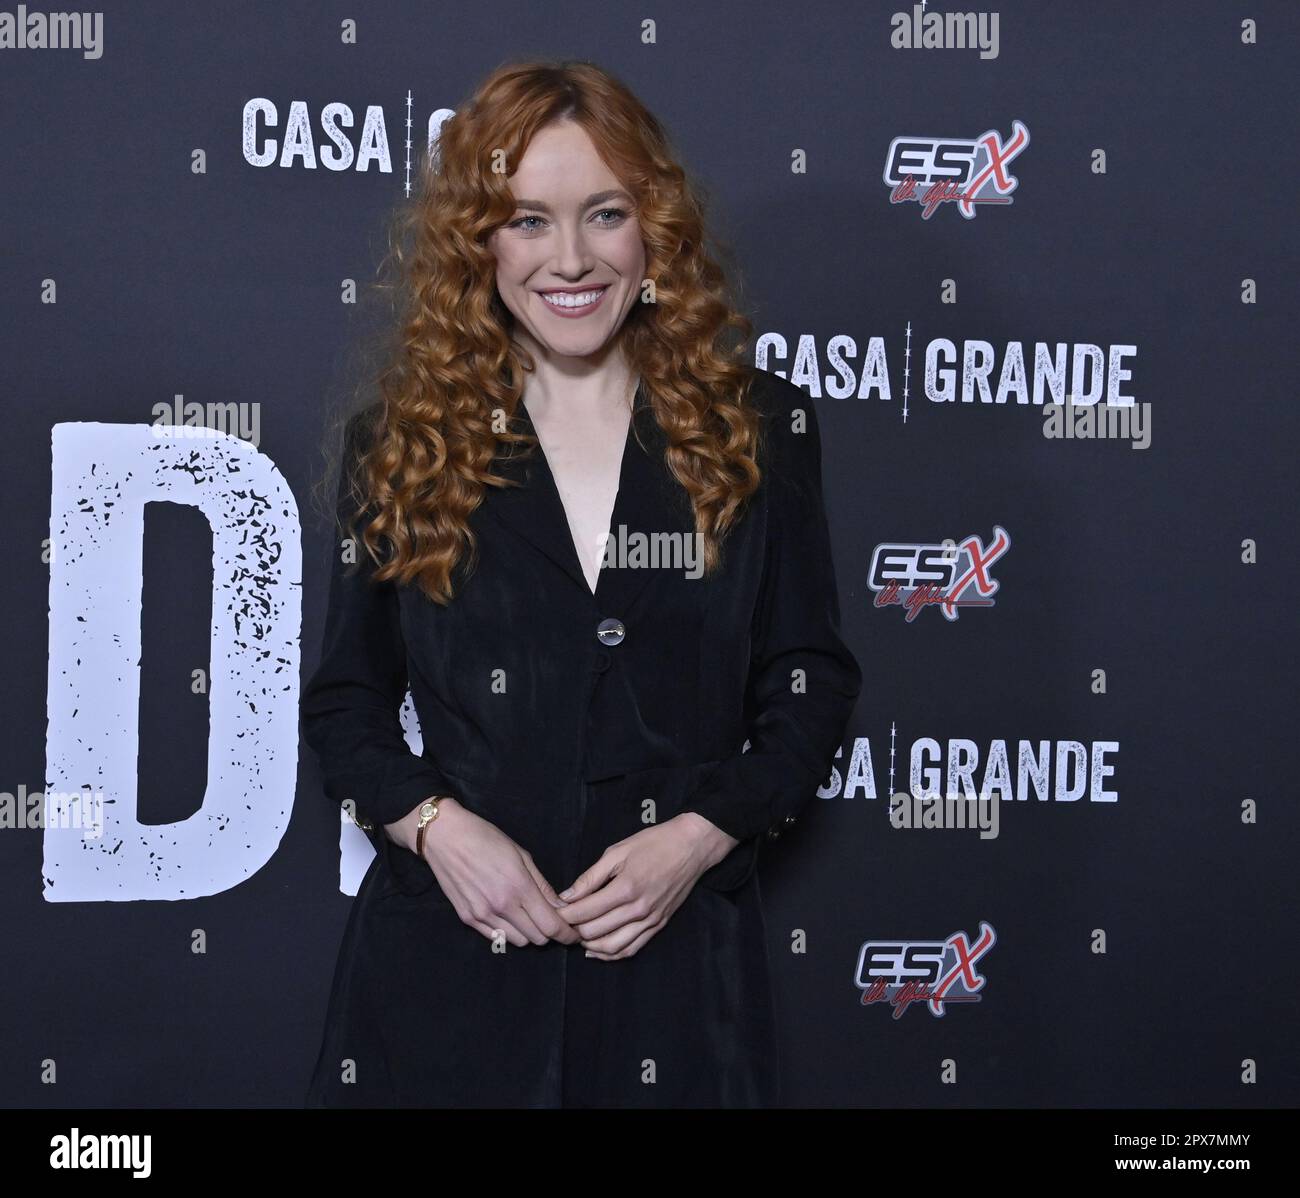 Burbank, United States. 01st May, 2023. Cast member Madison Lawlor attends the premiere of Prime Video's TV series drama 'Casa Grande' at Warner Bros. Studios in Burbank, California on Monday, May 1, 2023. Storyline: Follows several families in the farmland of Northern California as it navigates universal themes of class, immigration, culture and family. Photo by Jim Ruymen/UPI Credit: UPI/Alamy Live News Stock Photo